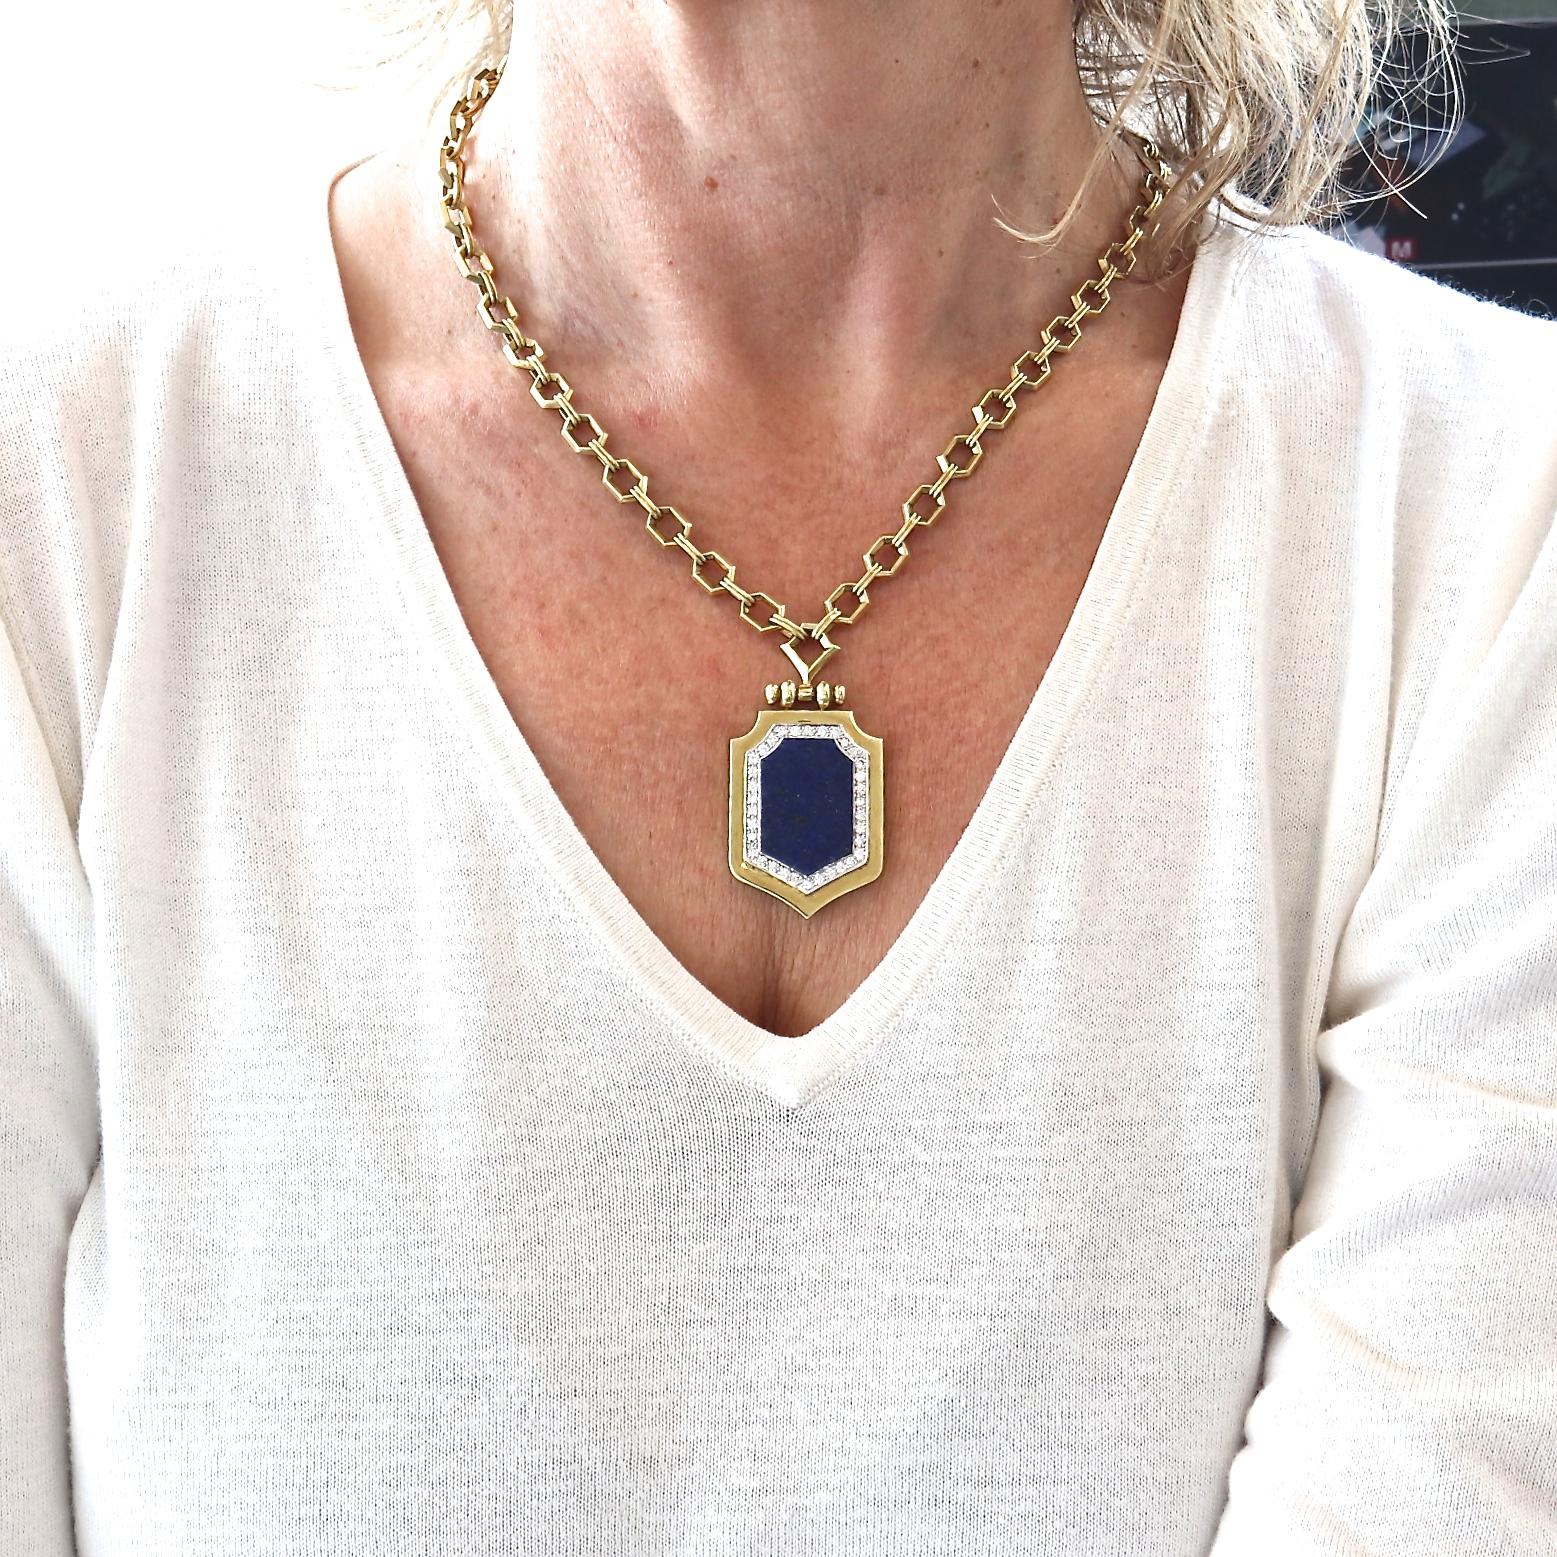 From the 1970's a lapis lazuli and diamond, 18k gold necklace. The uniquely shaped, gold flecked lapis lazuli slab is surrounded by 34 round brilliant diamonds with a total weight of approximately 1.02 carats, G-H color, VS clarity. Framed in 18k